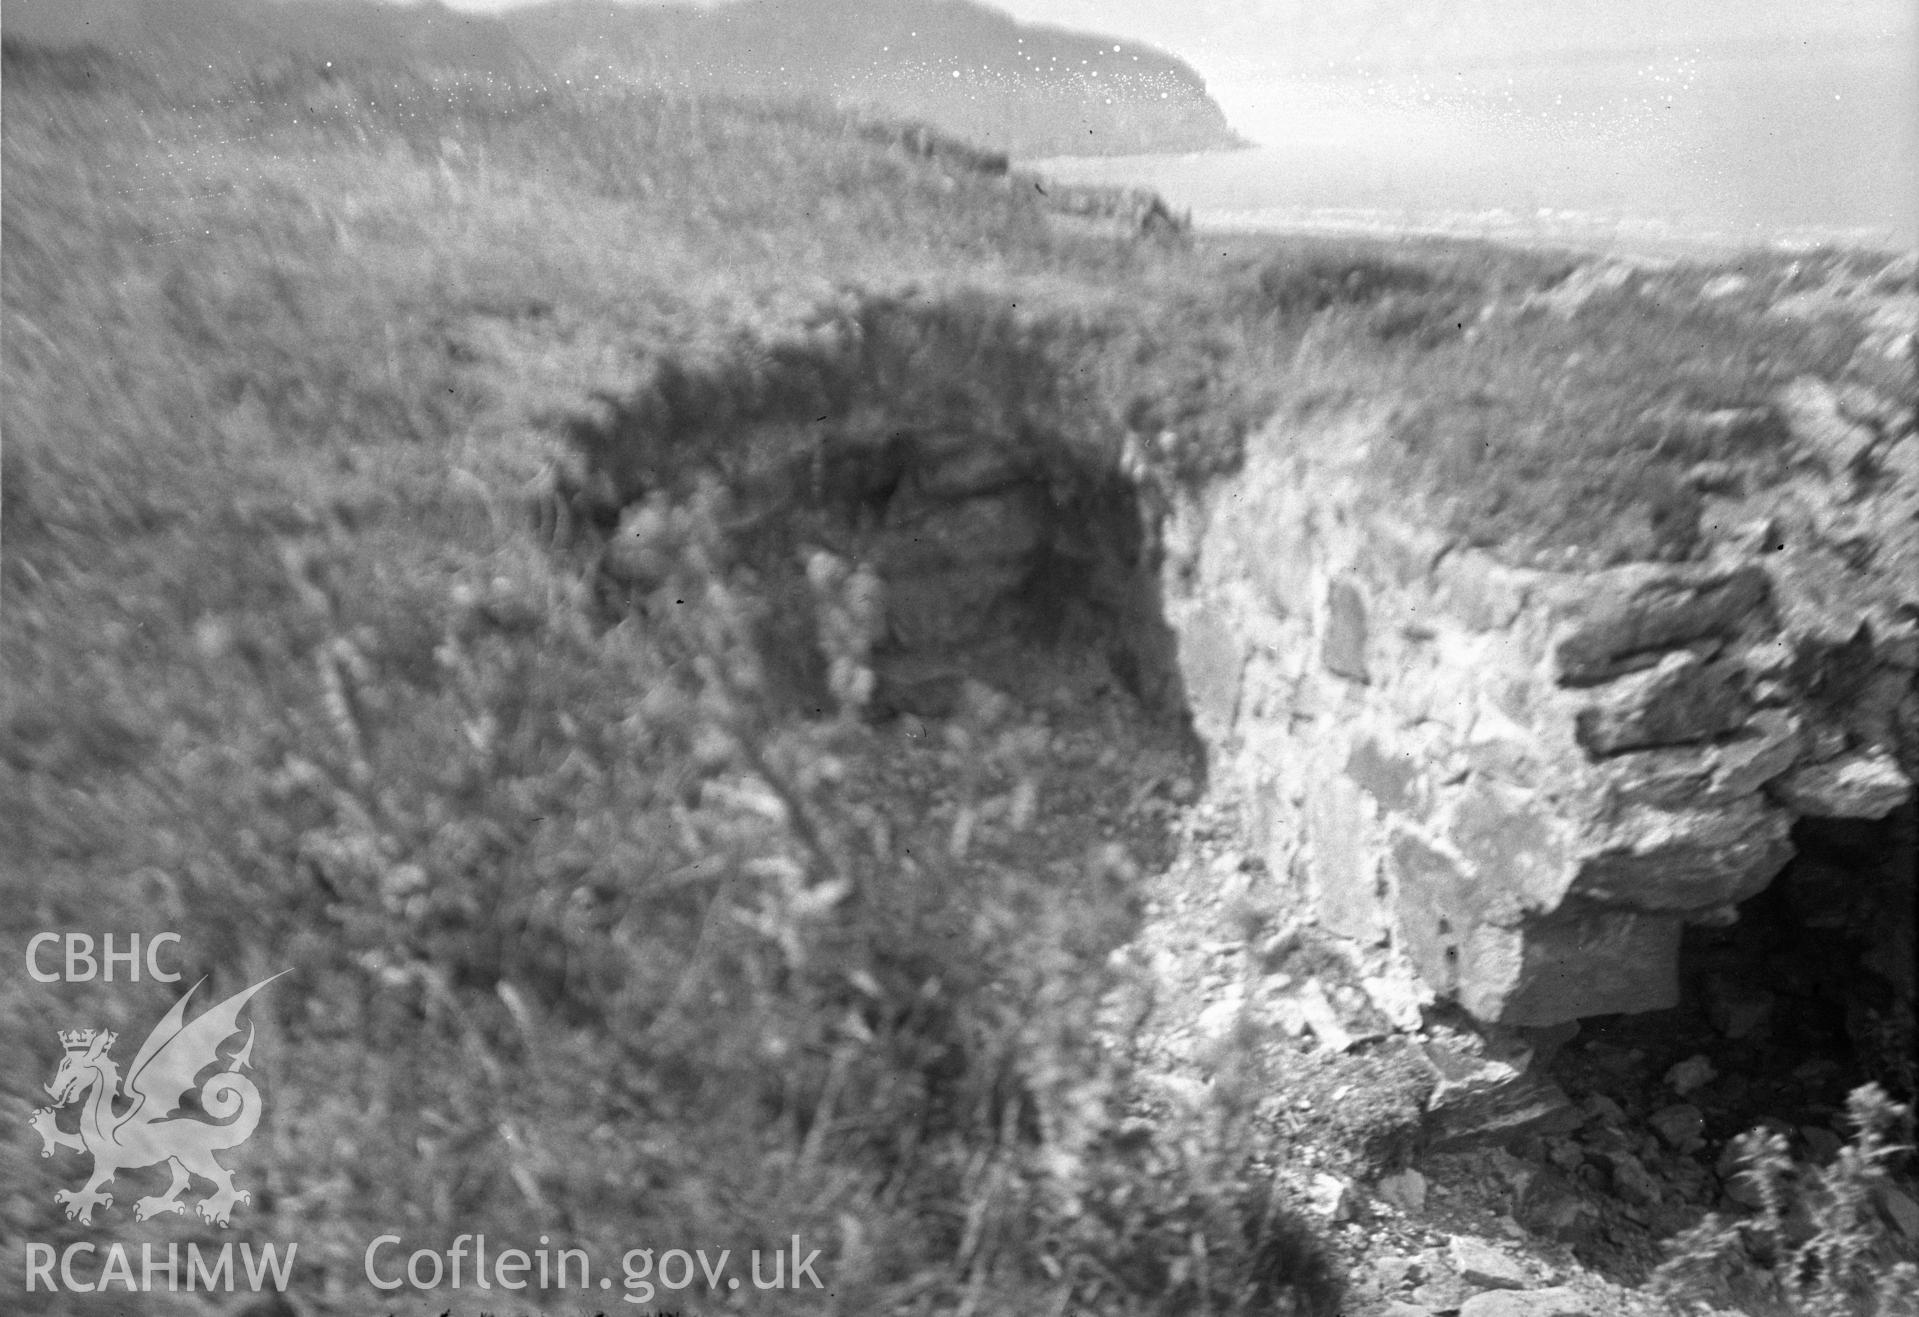 Digital copy of a nitrate negative showing Deganwy Castle.